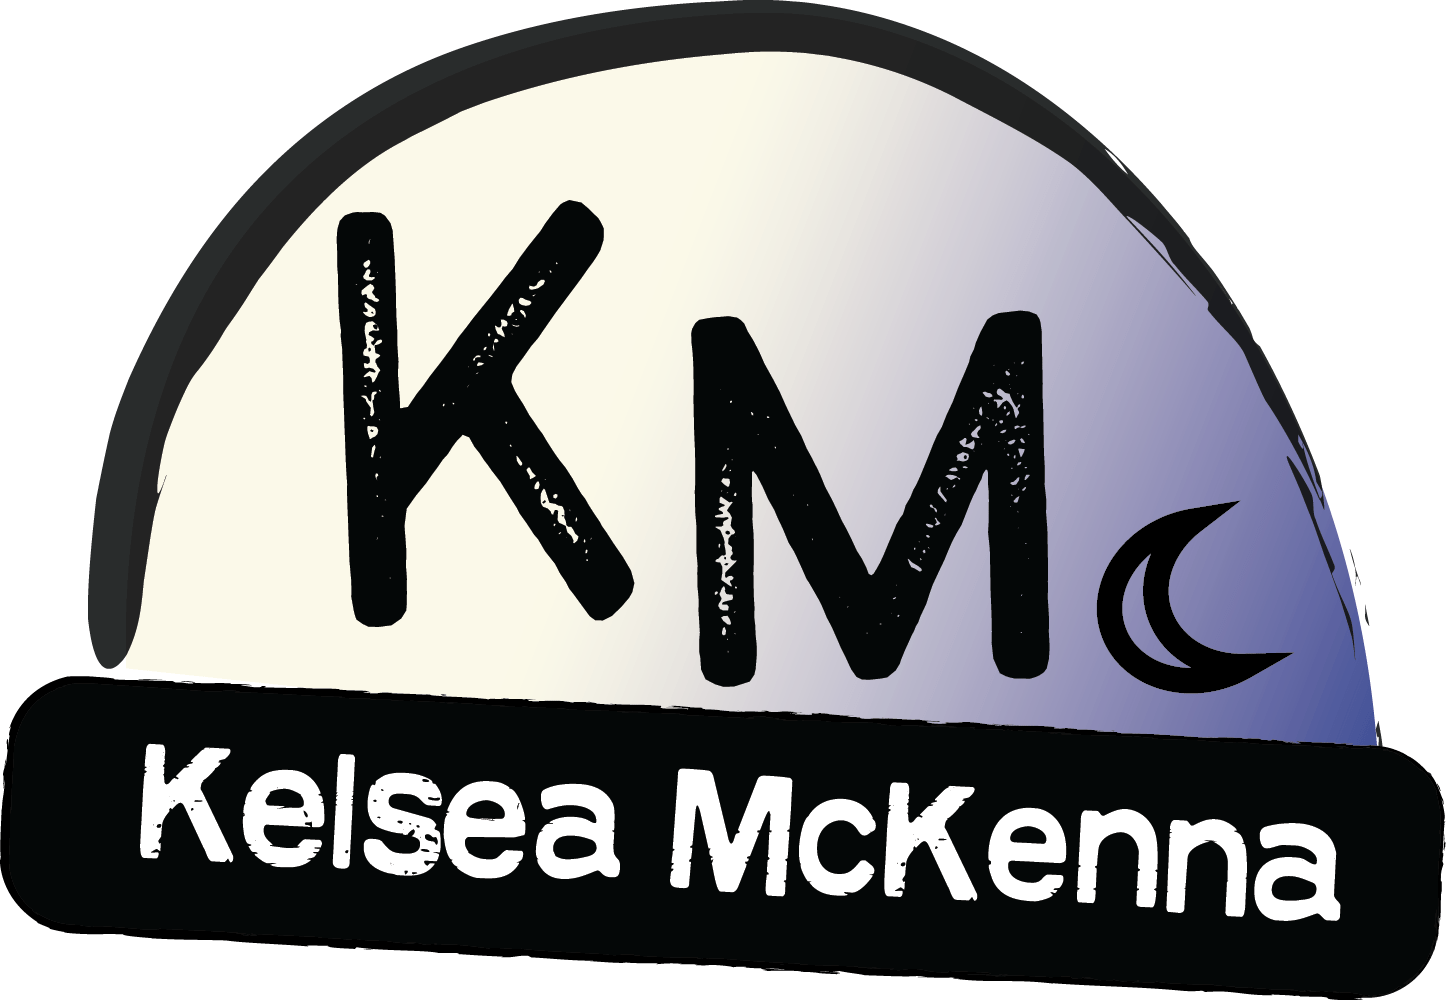 Blue and yellow half moon logo with Kelsea McKenna's name at the bottom and initials KM inside the moon. There's a c shaped like a crescent moon beside "KM".